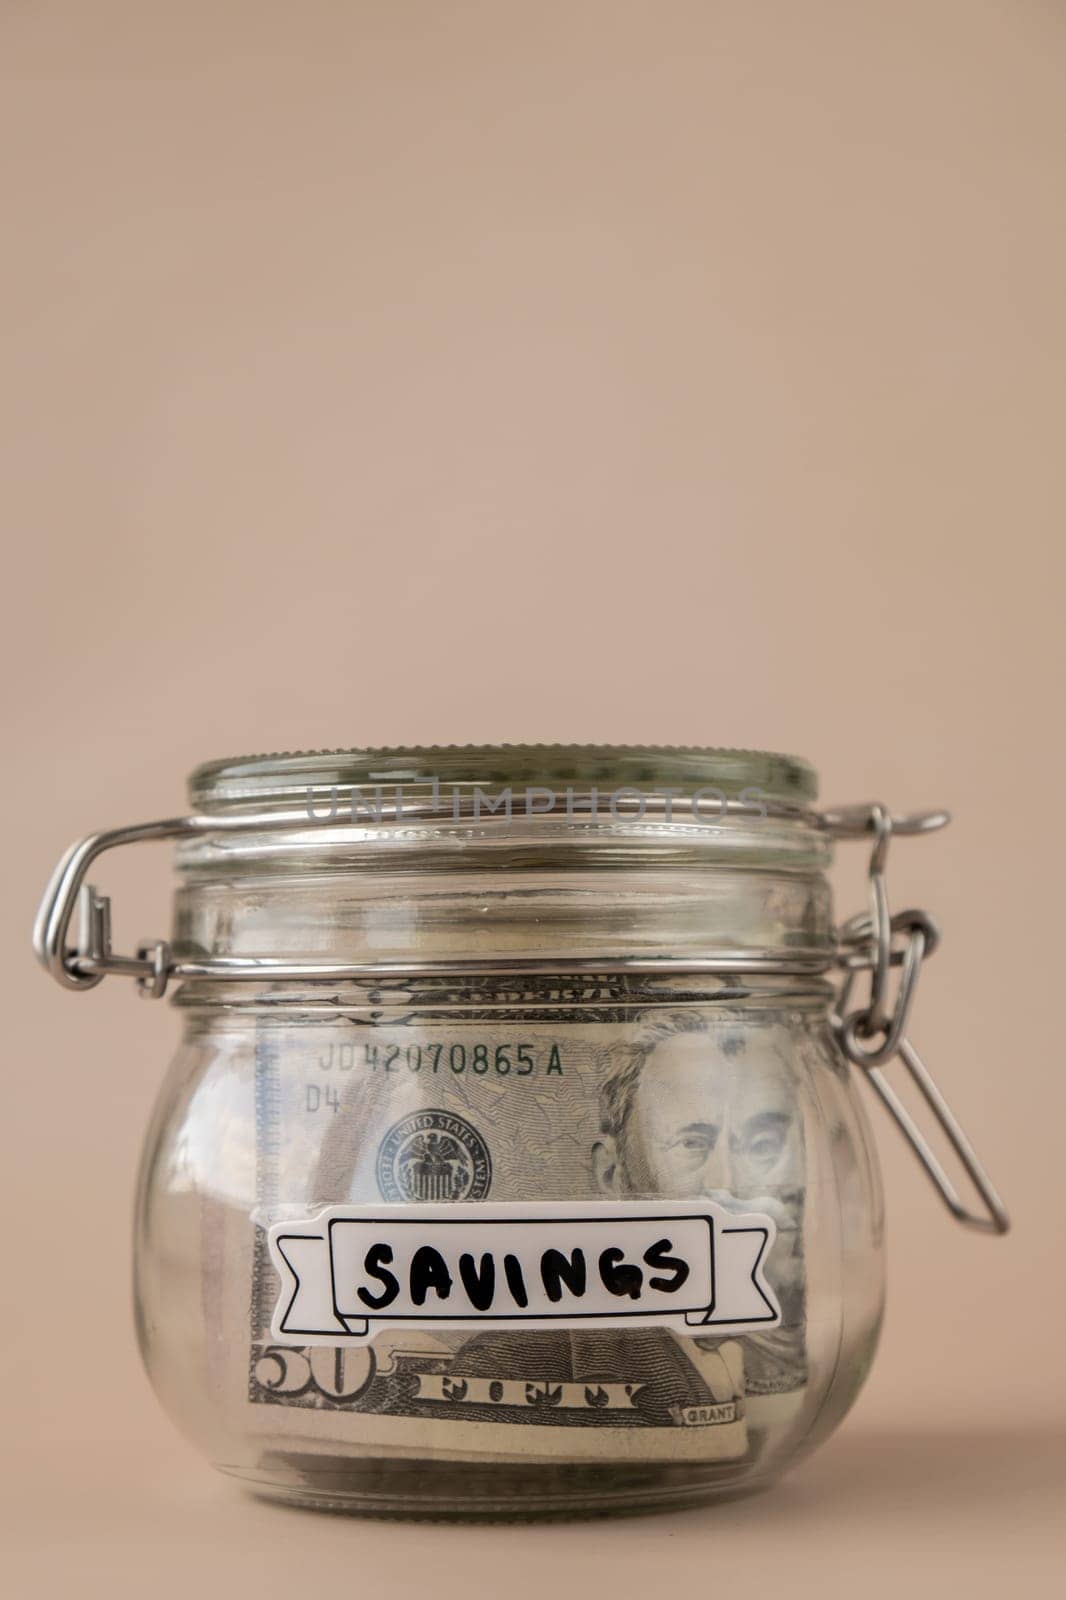 Saving Money In Glass Jar filled with Dollars banknotes. SAVINGS transcription in front of jar. Managing personal finances extra income for future insecurity by anna_stasiia